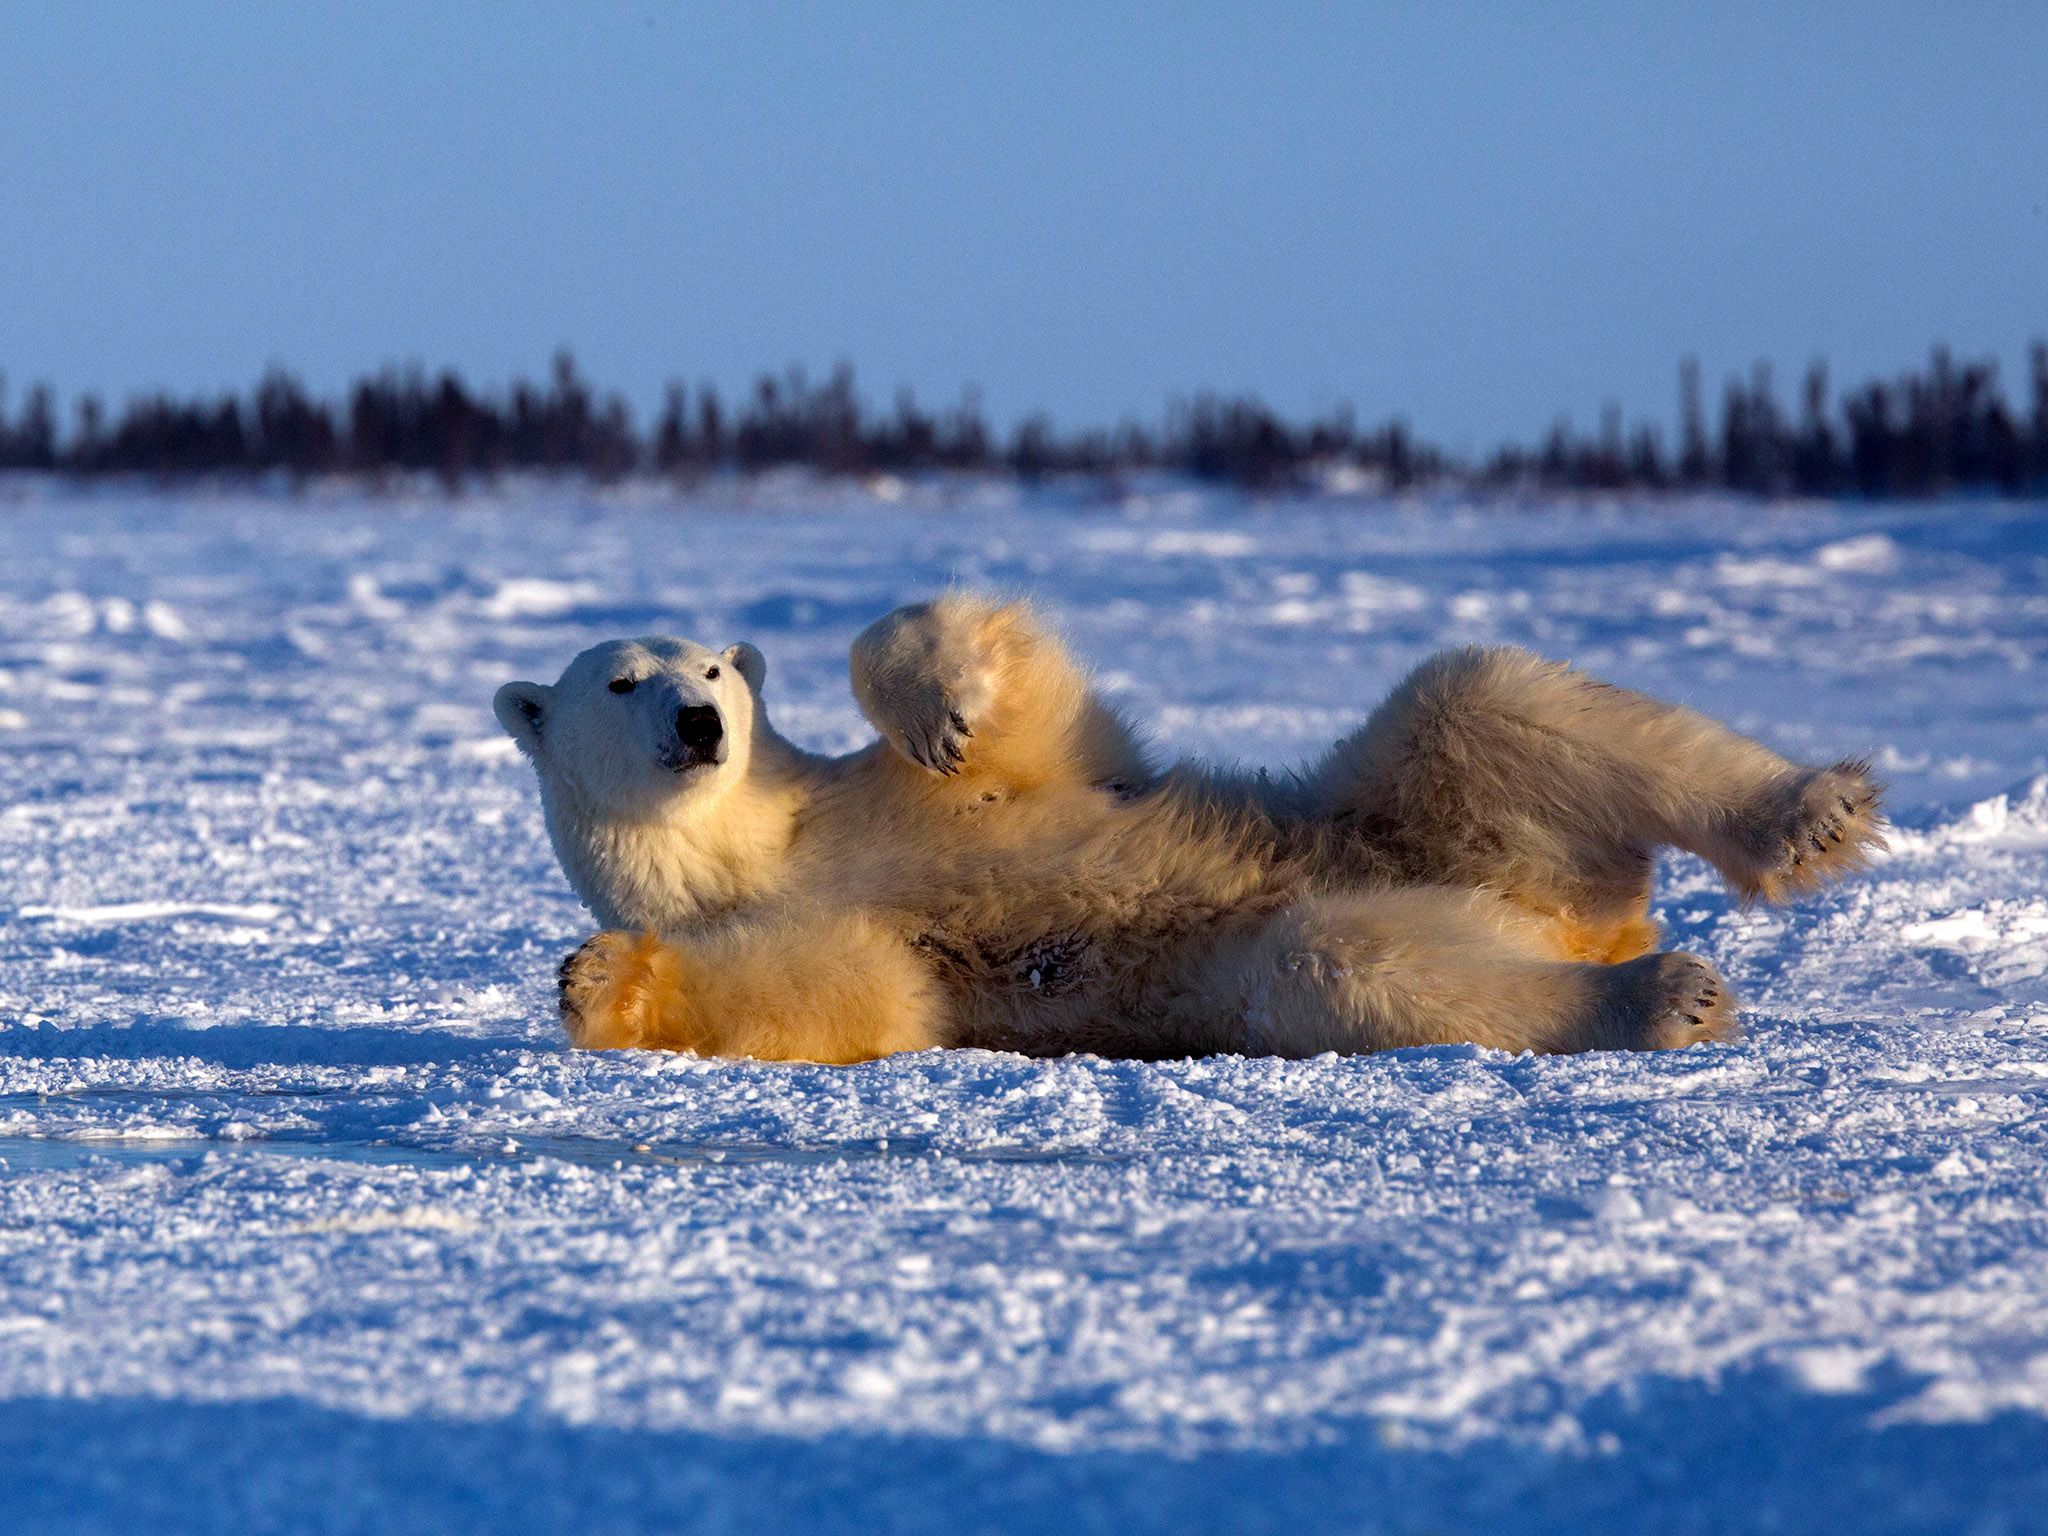 Mother polar bear rolling in snow. This image is from Wild Canada. [Photo of the day - October 2014]